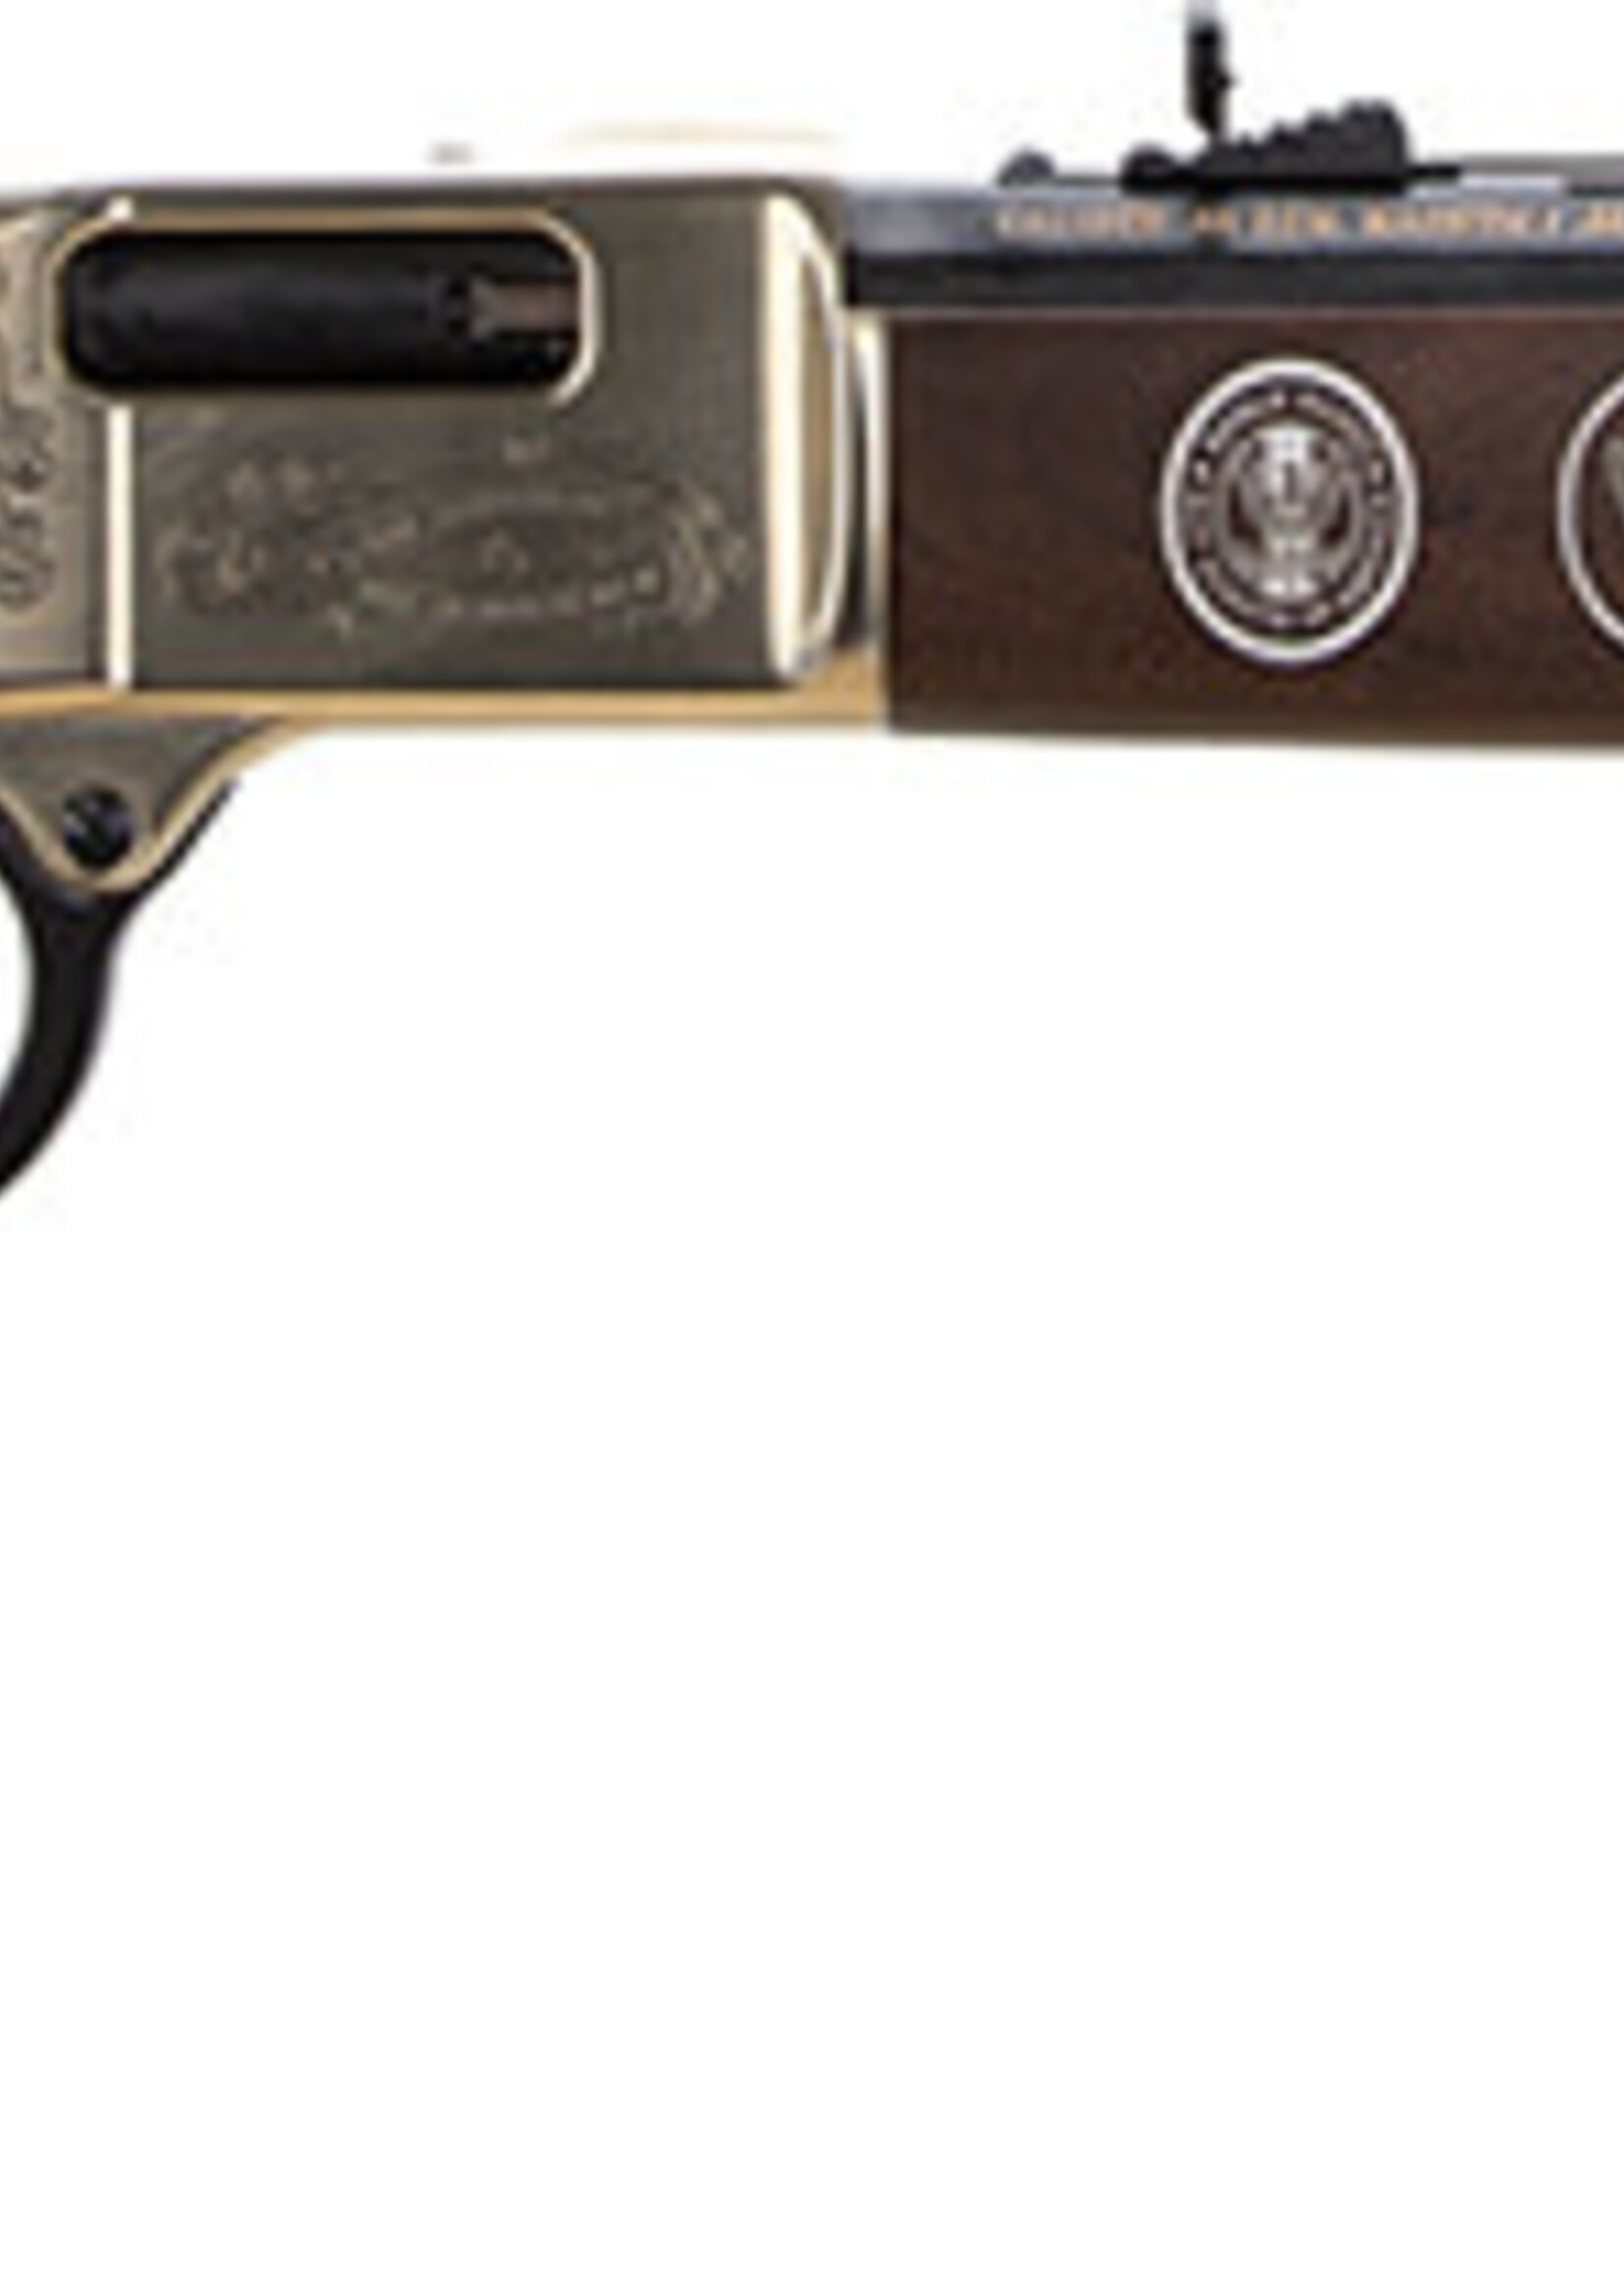 Henry Henry H006ES Big Boy Eagle Scout Centennial Tribute 44 Spec Caliber with 10+1 Capacity, 20" Blued Barrel, Polished Brass Engraved Metal Finish & American Walnut Stock Right Hand (Full Size)